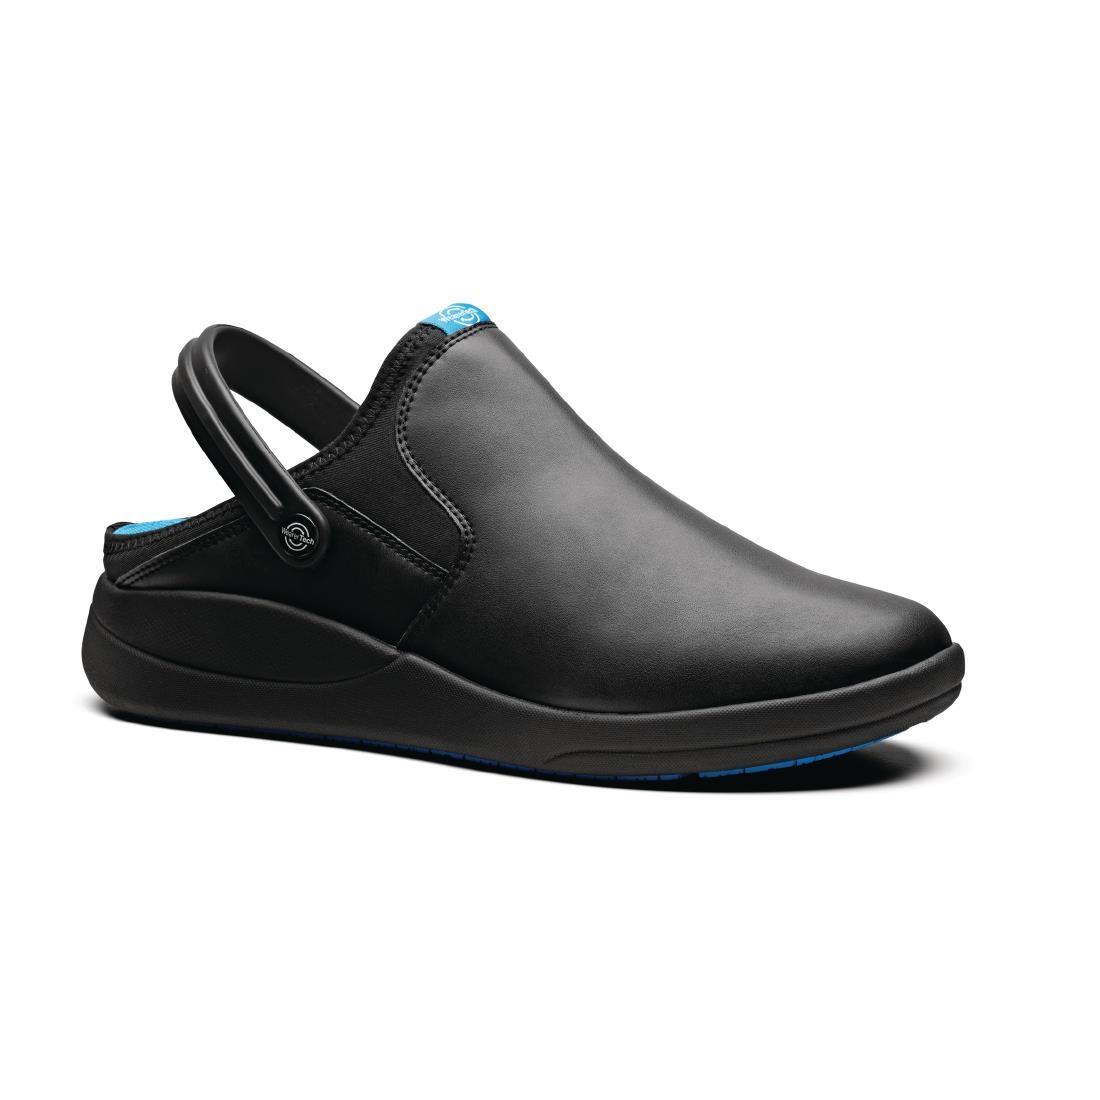 WearerTech Refresh Clog Black with Firm Insoles Size 37 - BB556-4  - 2